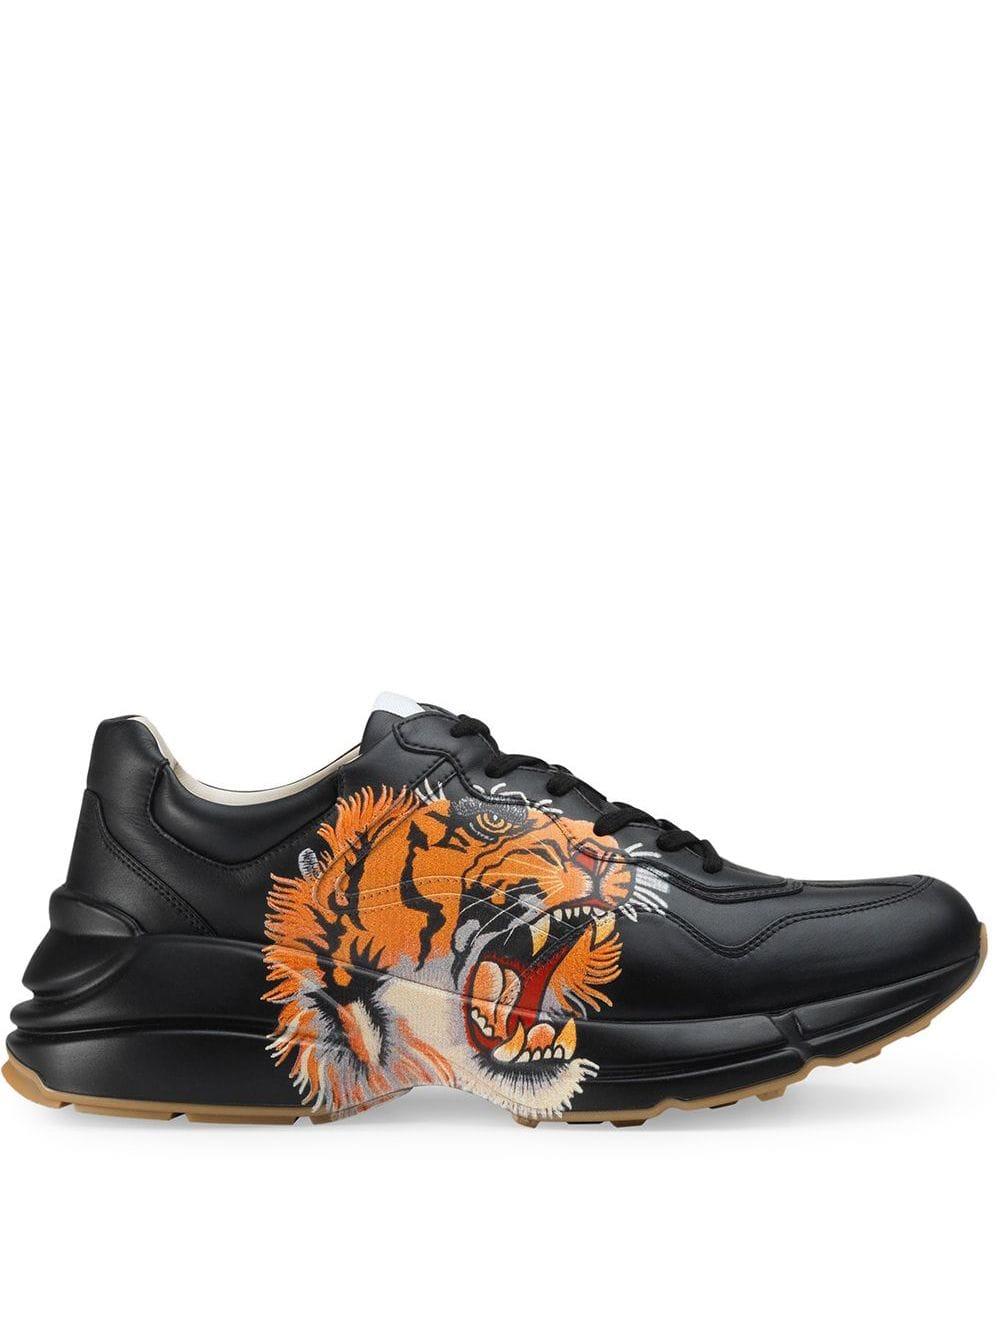 gucci tiger shoes price